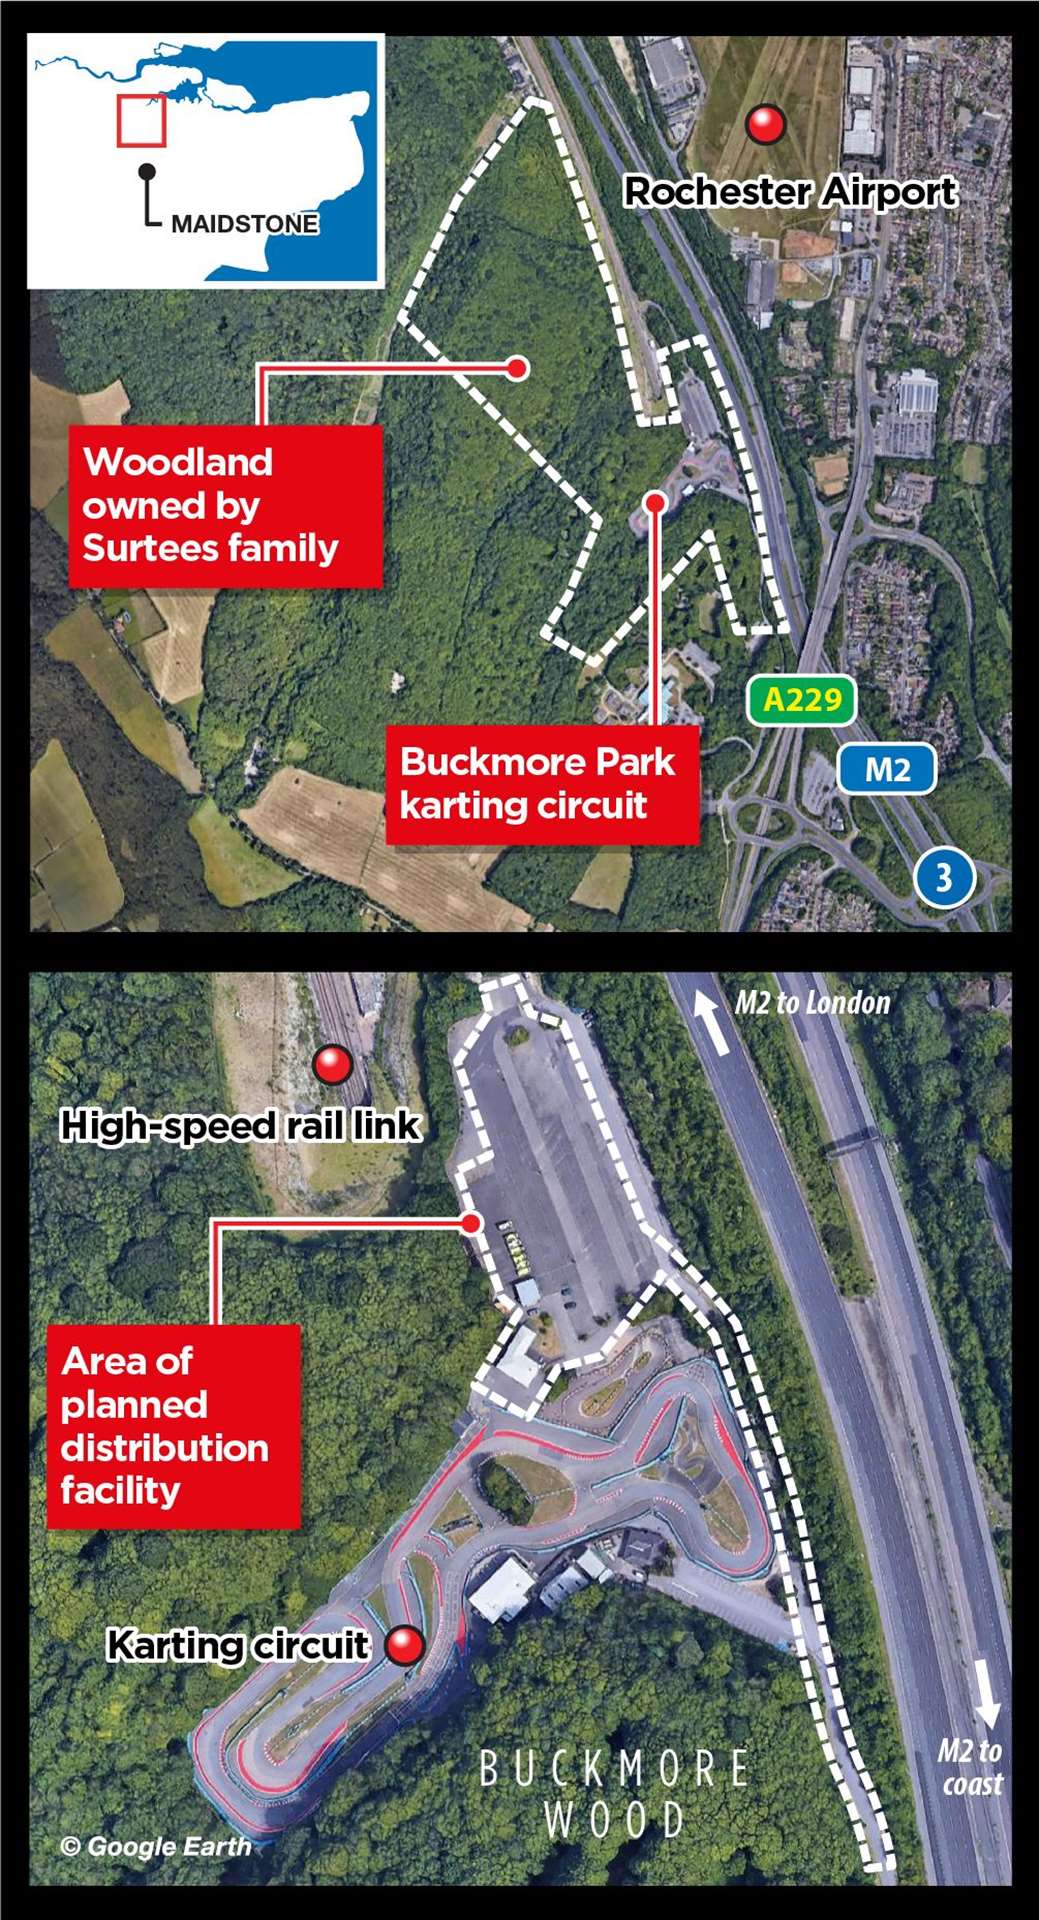 The Surtees family owns a large part of the woodland surrounding Buckmore; plans submitted earlier this year would have seen the existing paddock area turned into a distribution facility if approved. Buckmore bosses had previously discussed plans with the council for a 25,000 sq ft warehouse on the plot